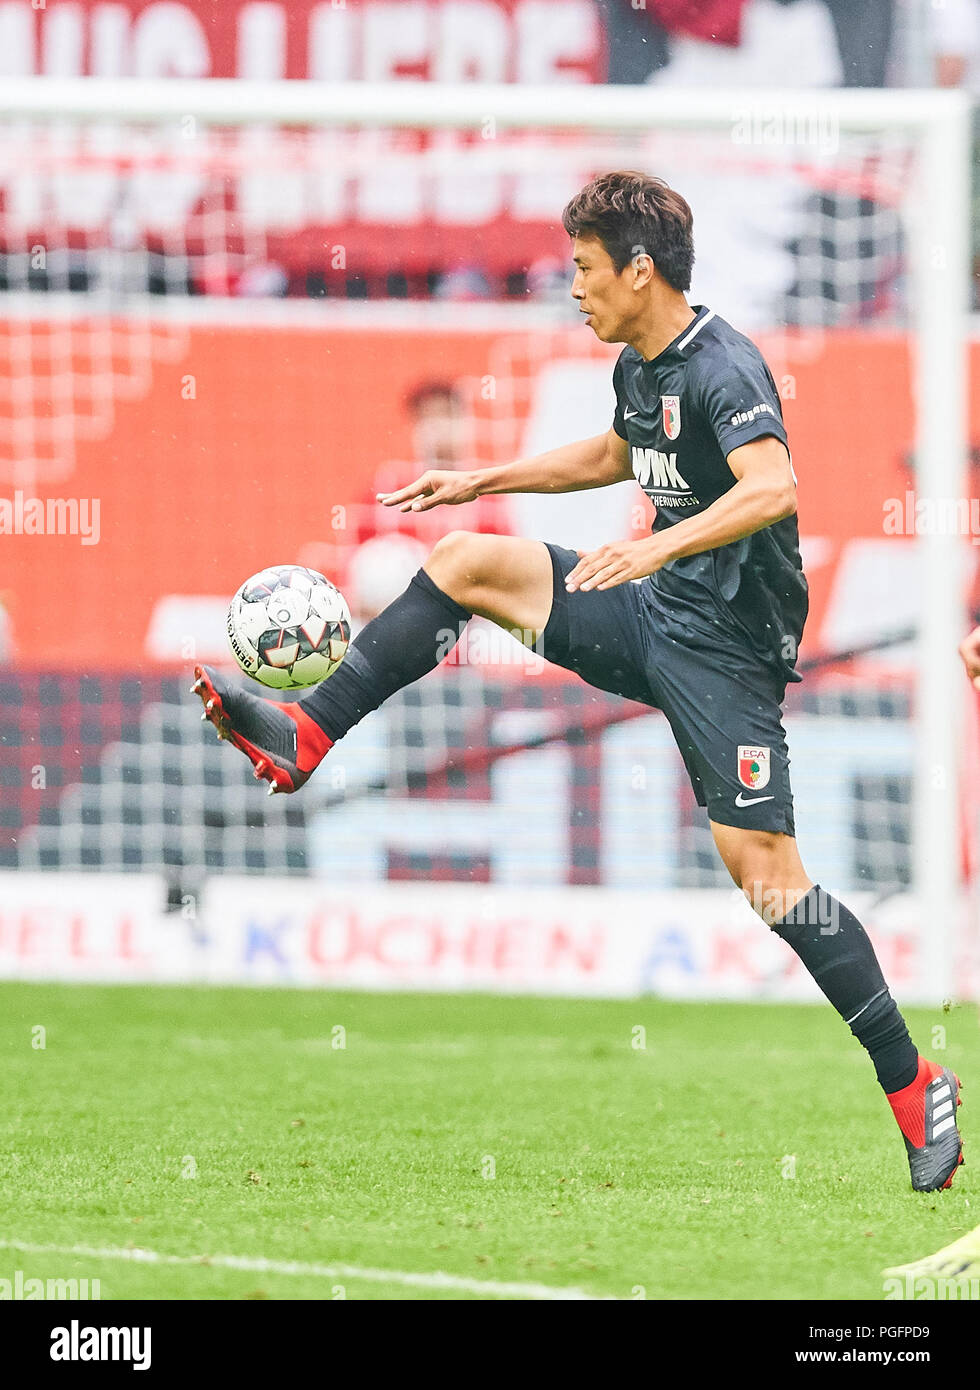 Dusseldorf, Germany. 25 August 2018. Fortuna-FCA 1-2 Soccer, Dusseldorf, August 25, 2018 Ja-Cheol KOO, FCA 19   drives, controls the ball, action, full-size, Single action with ball, full body, whole figure, cutout, single shots, ball treatment, pick-up, header, cut out,  FORTUNA DUSSELDORF - FC AUGSBURG 1-2  - DFL REGULATIONS PROHIBIT ANY USE OF PHOTOGRAPHS as IMAGE SEQUENCES and/or QUASI-VIDEO -  1.German Football League , Duesseldorf, August 25, 2018,  Season 2018/2019, matchday 1 © Peter Schatz / Alamy Live News Stock Photo